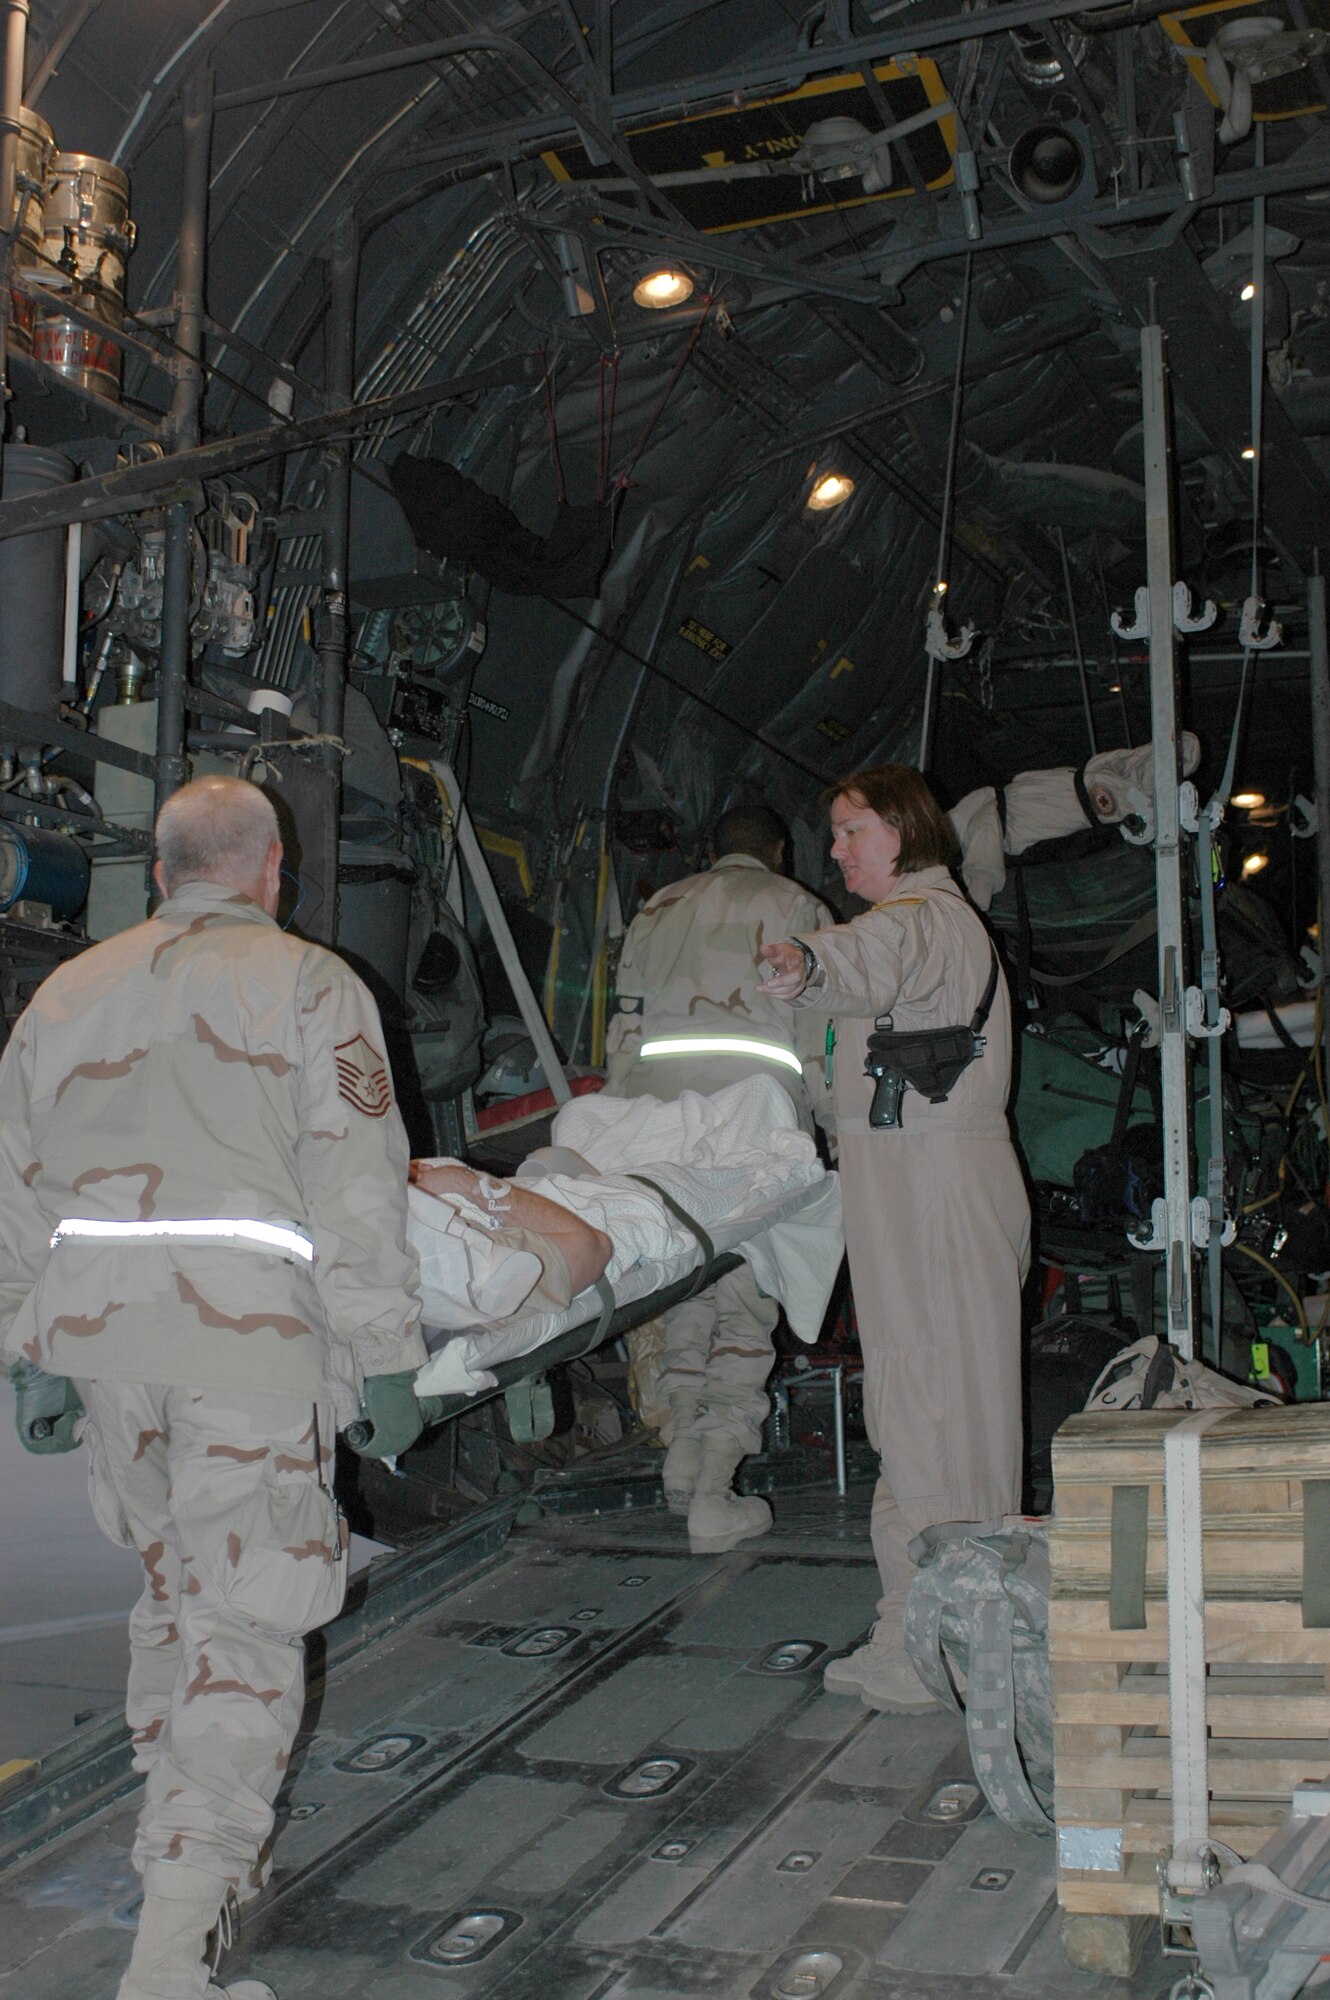 (Above) Airmen with the 379th Expeditionary Aeromedical Evacuation Squadron prepare to evacuate an injured servicemember at a forward deployed location in Iraq. The 379th EAES has flown more than 200 missions, transporting more than 600 patients. Support aircraft have transported more than 130,000 passengers and 74,000 tons of cargo.  (U.S. Air Force photo by Staff Sgt. Cassandra Locke)